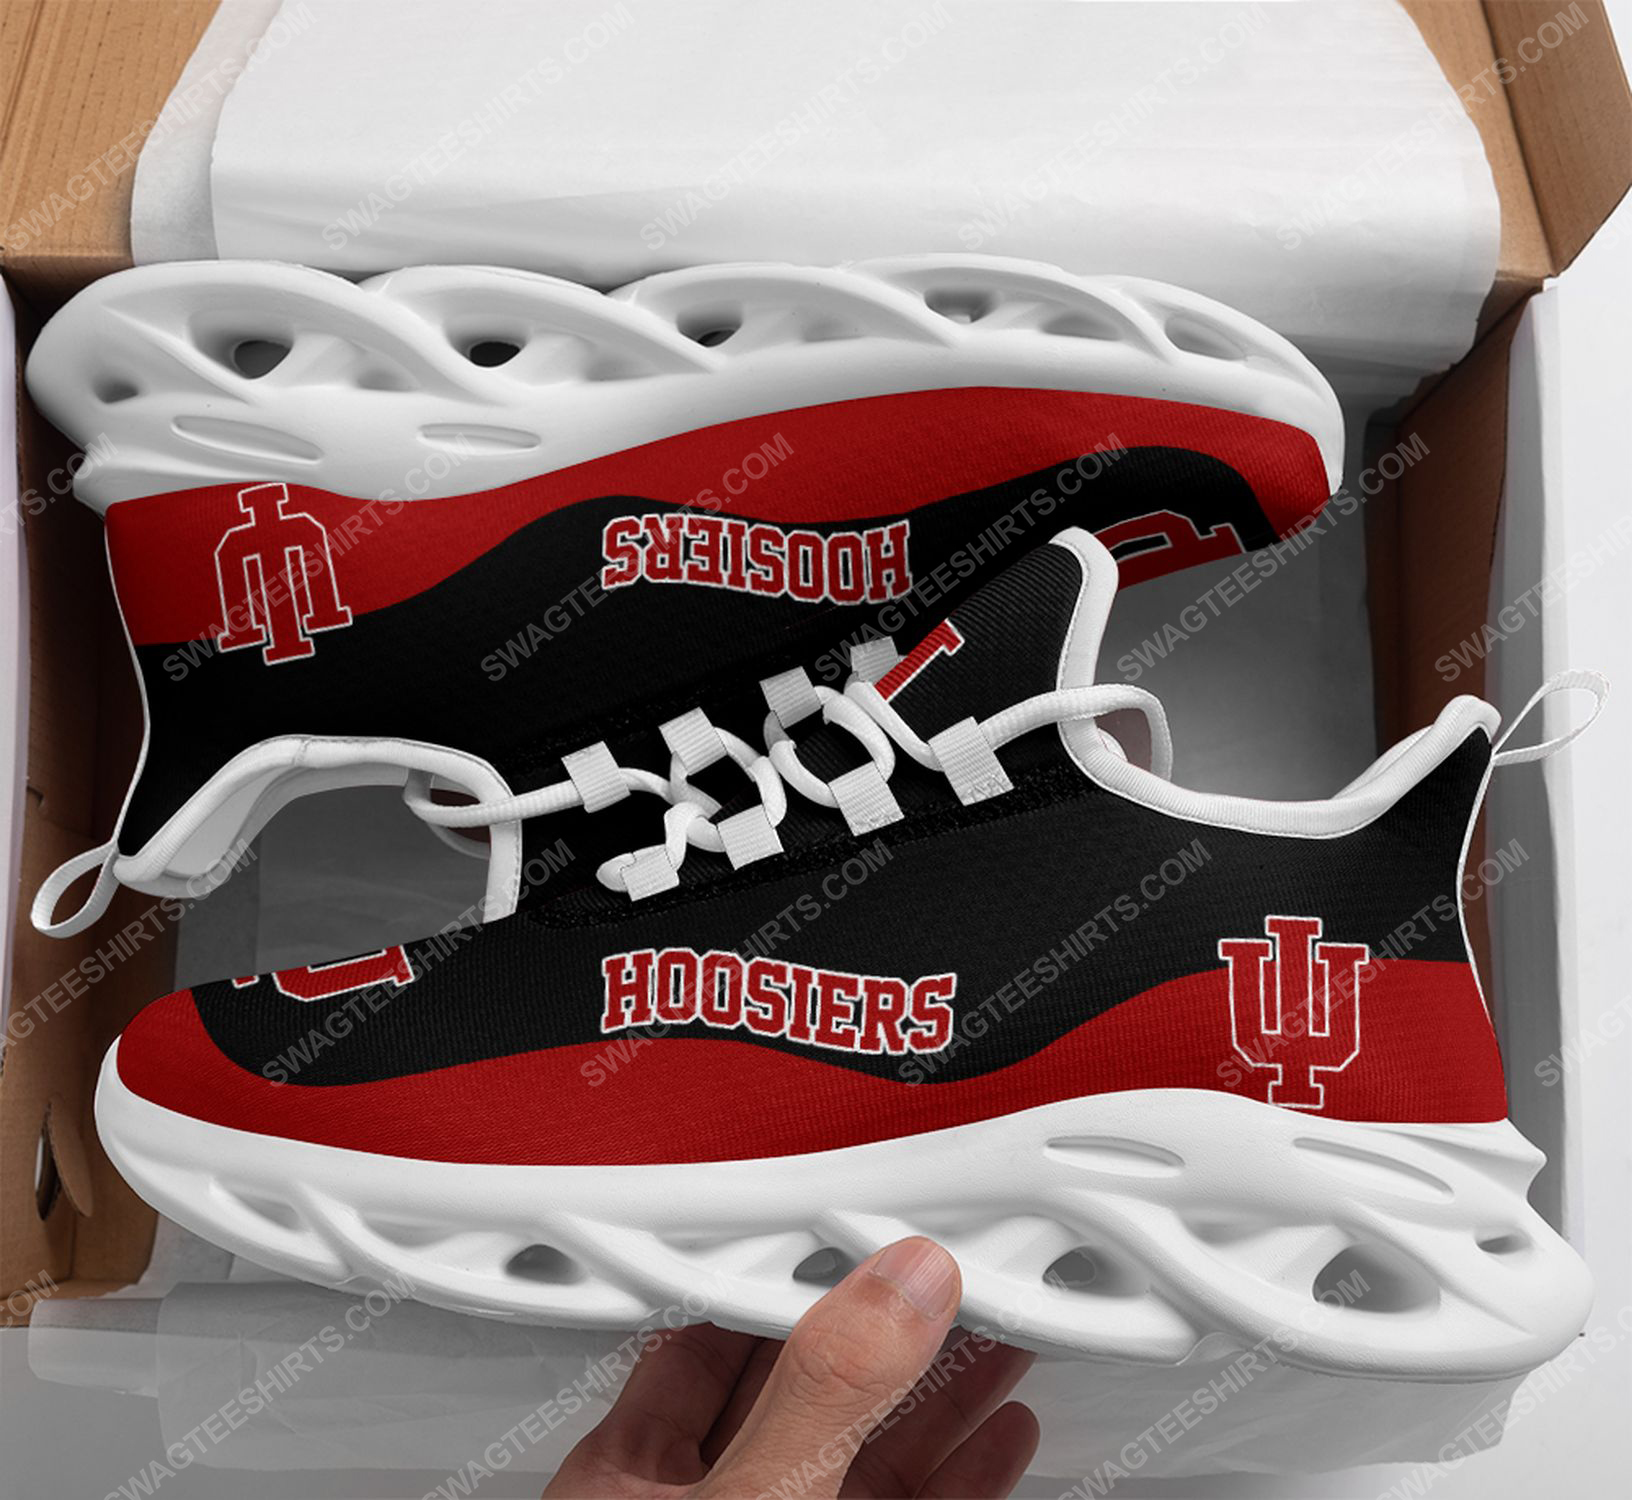 The indiana hoosiers football team max soul shoes 1